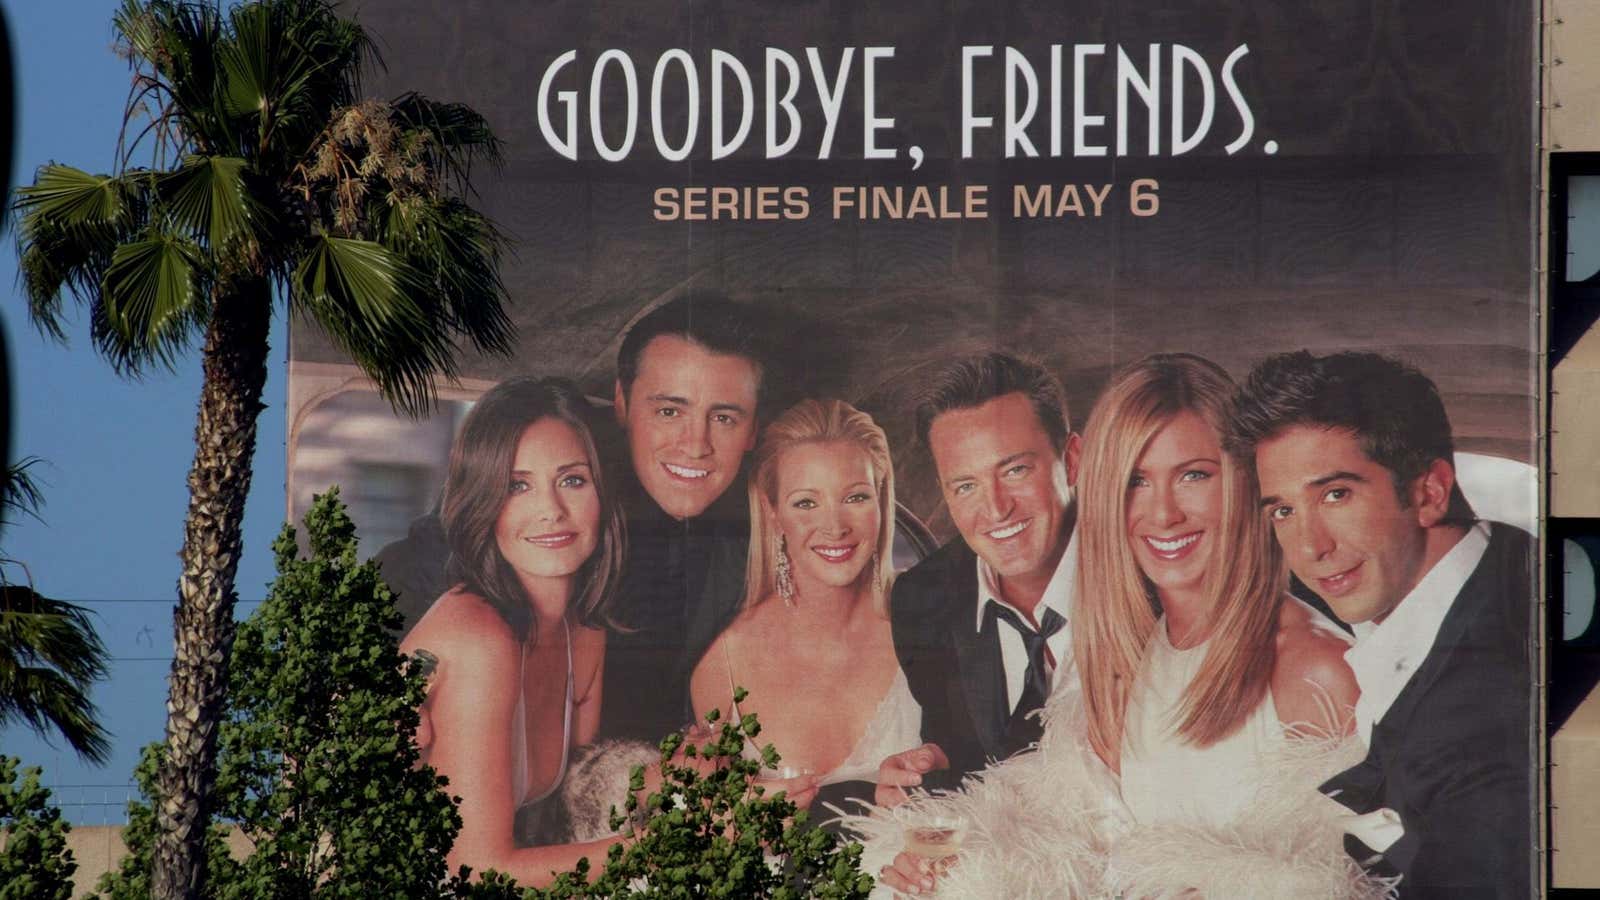 Friends May Be Leaving Netflix for WarnerMedia's New Streaming Service